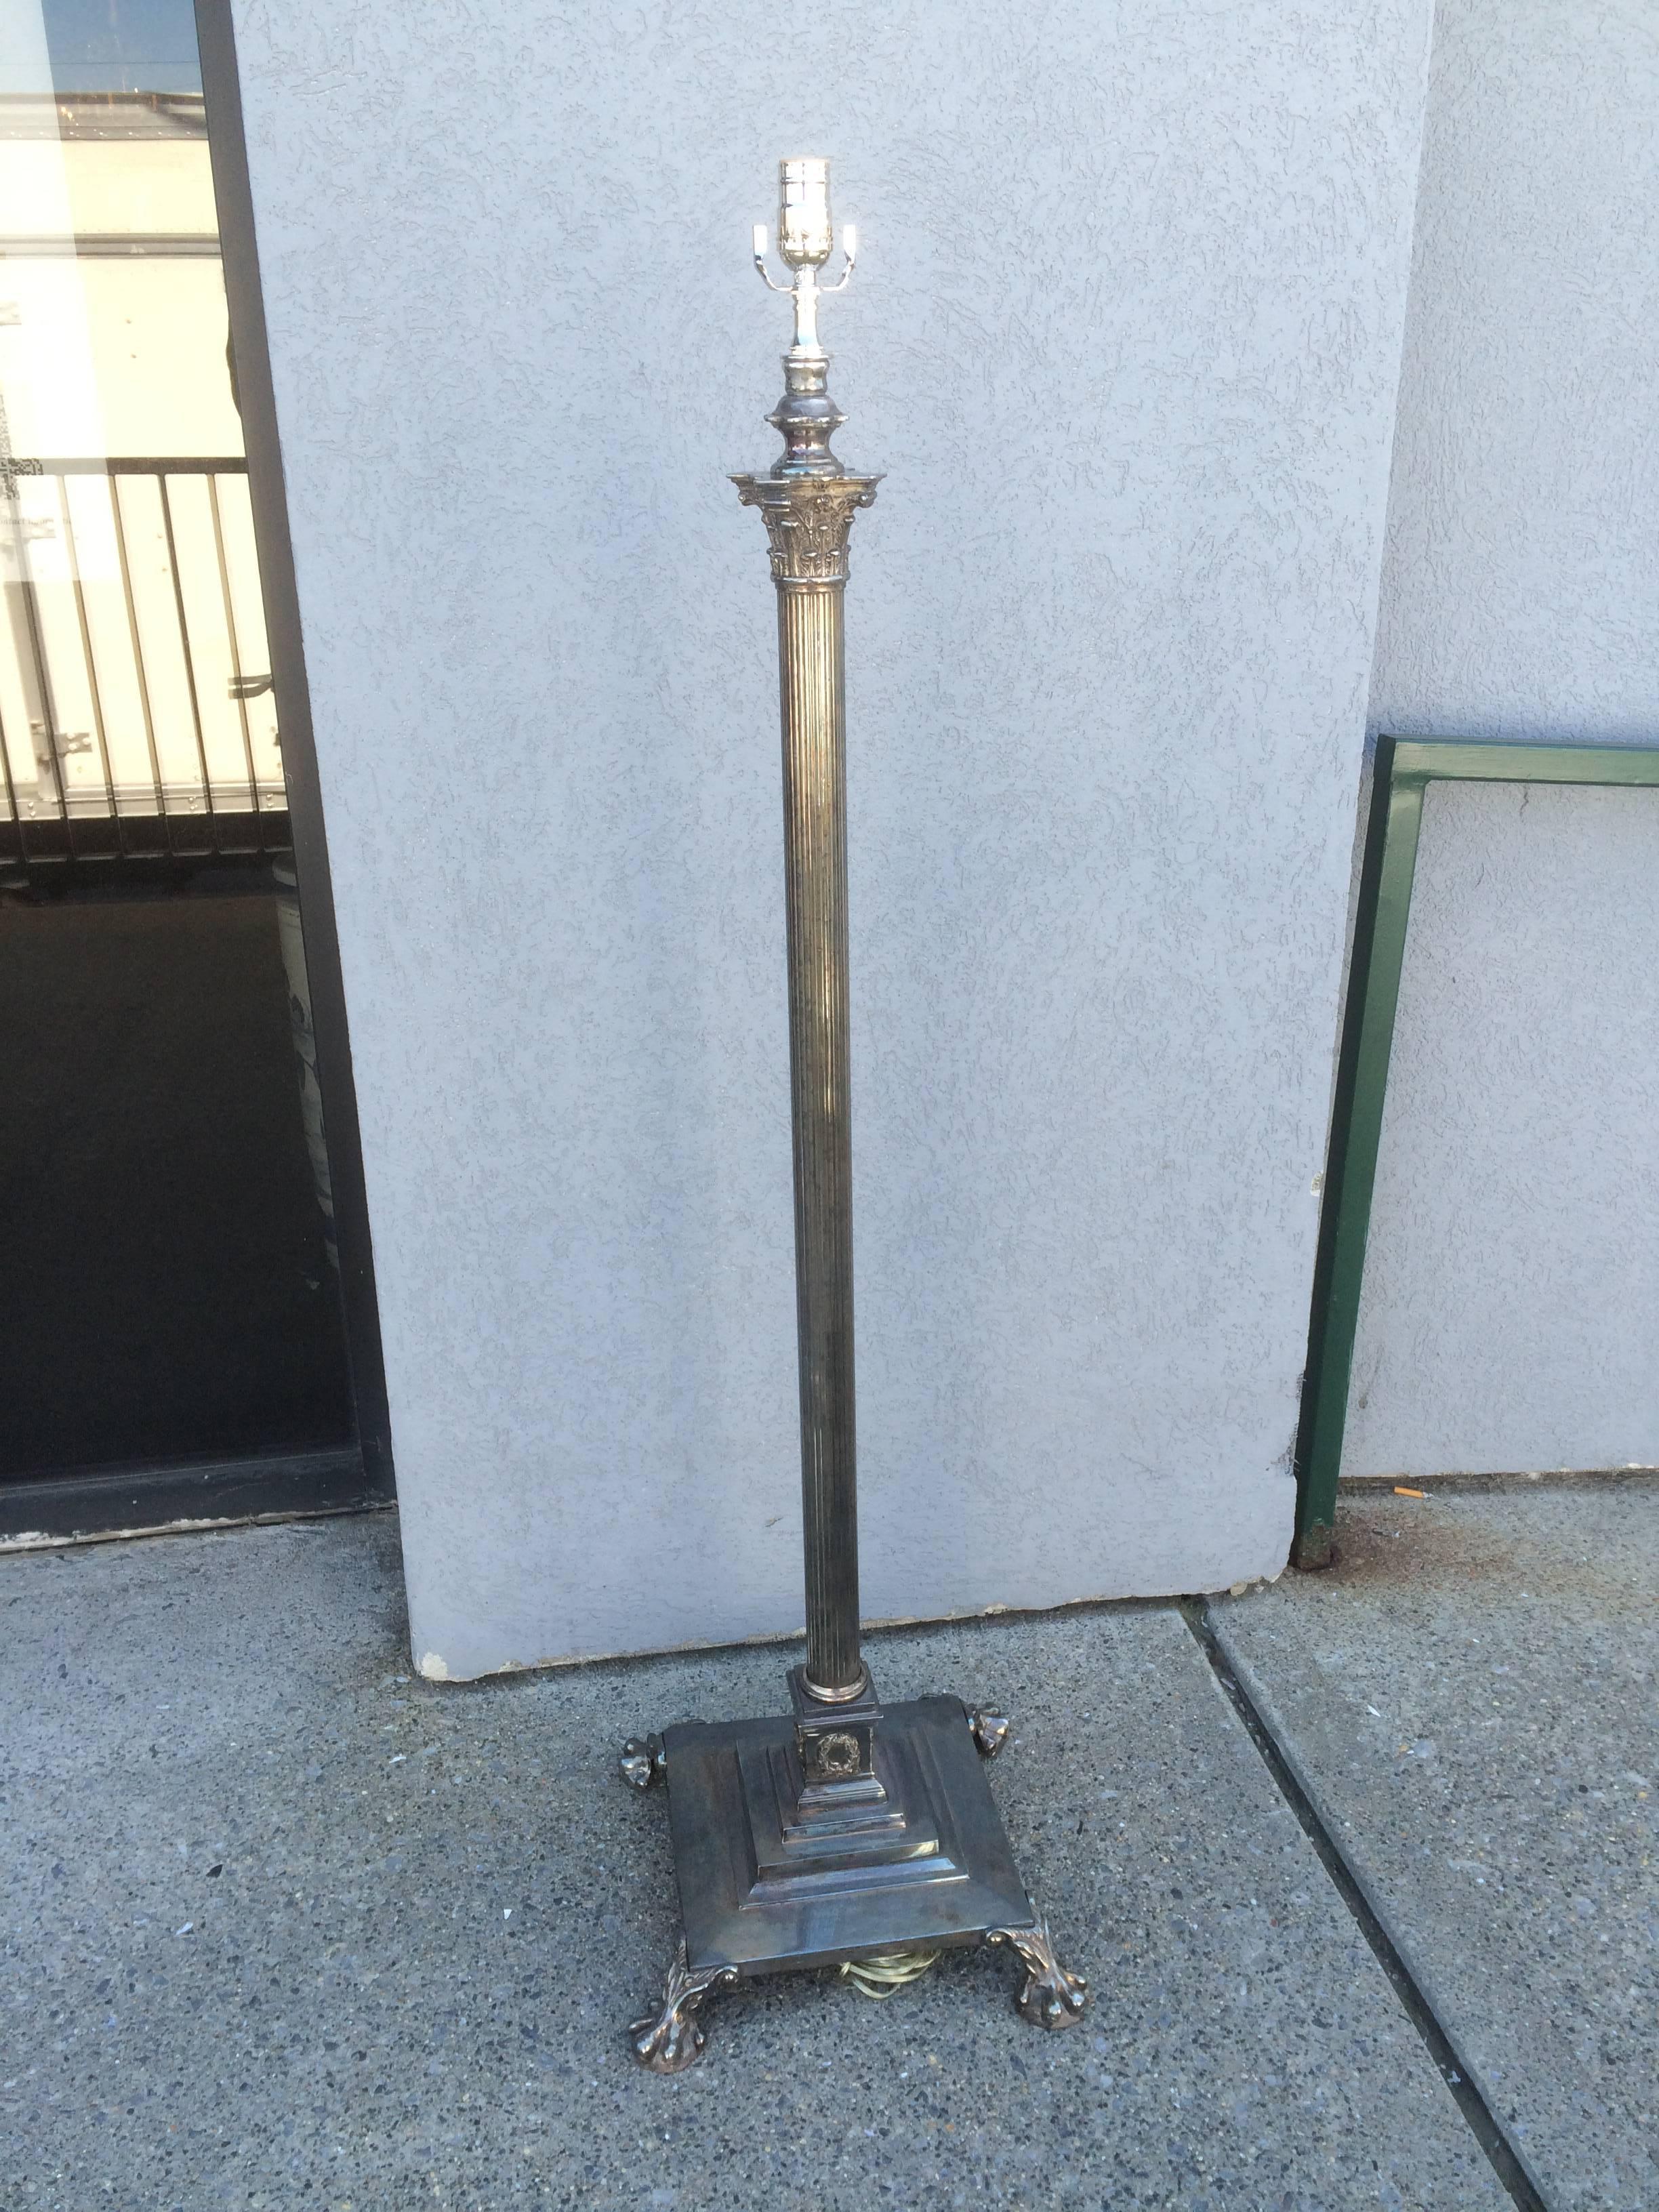 English Regency silver plated floor lamp in the form of a neoclassical fluted column topped by a Corinthian capital on a square stepped pedestal base supported by four paw feet. Converted from an oil lamp, all new wiring.